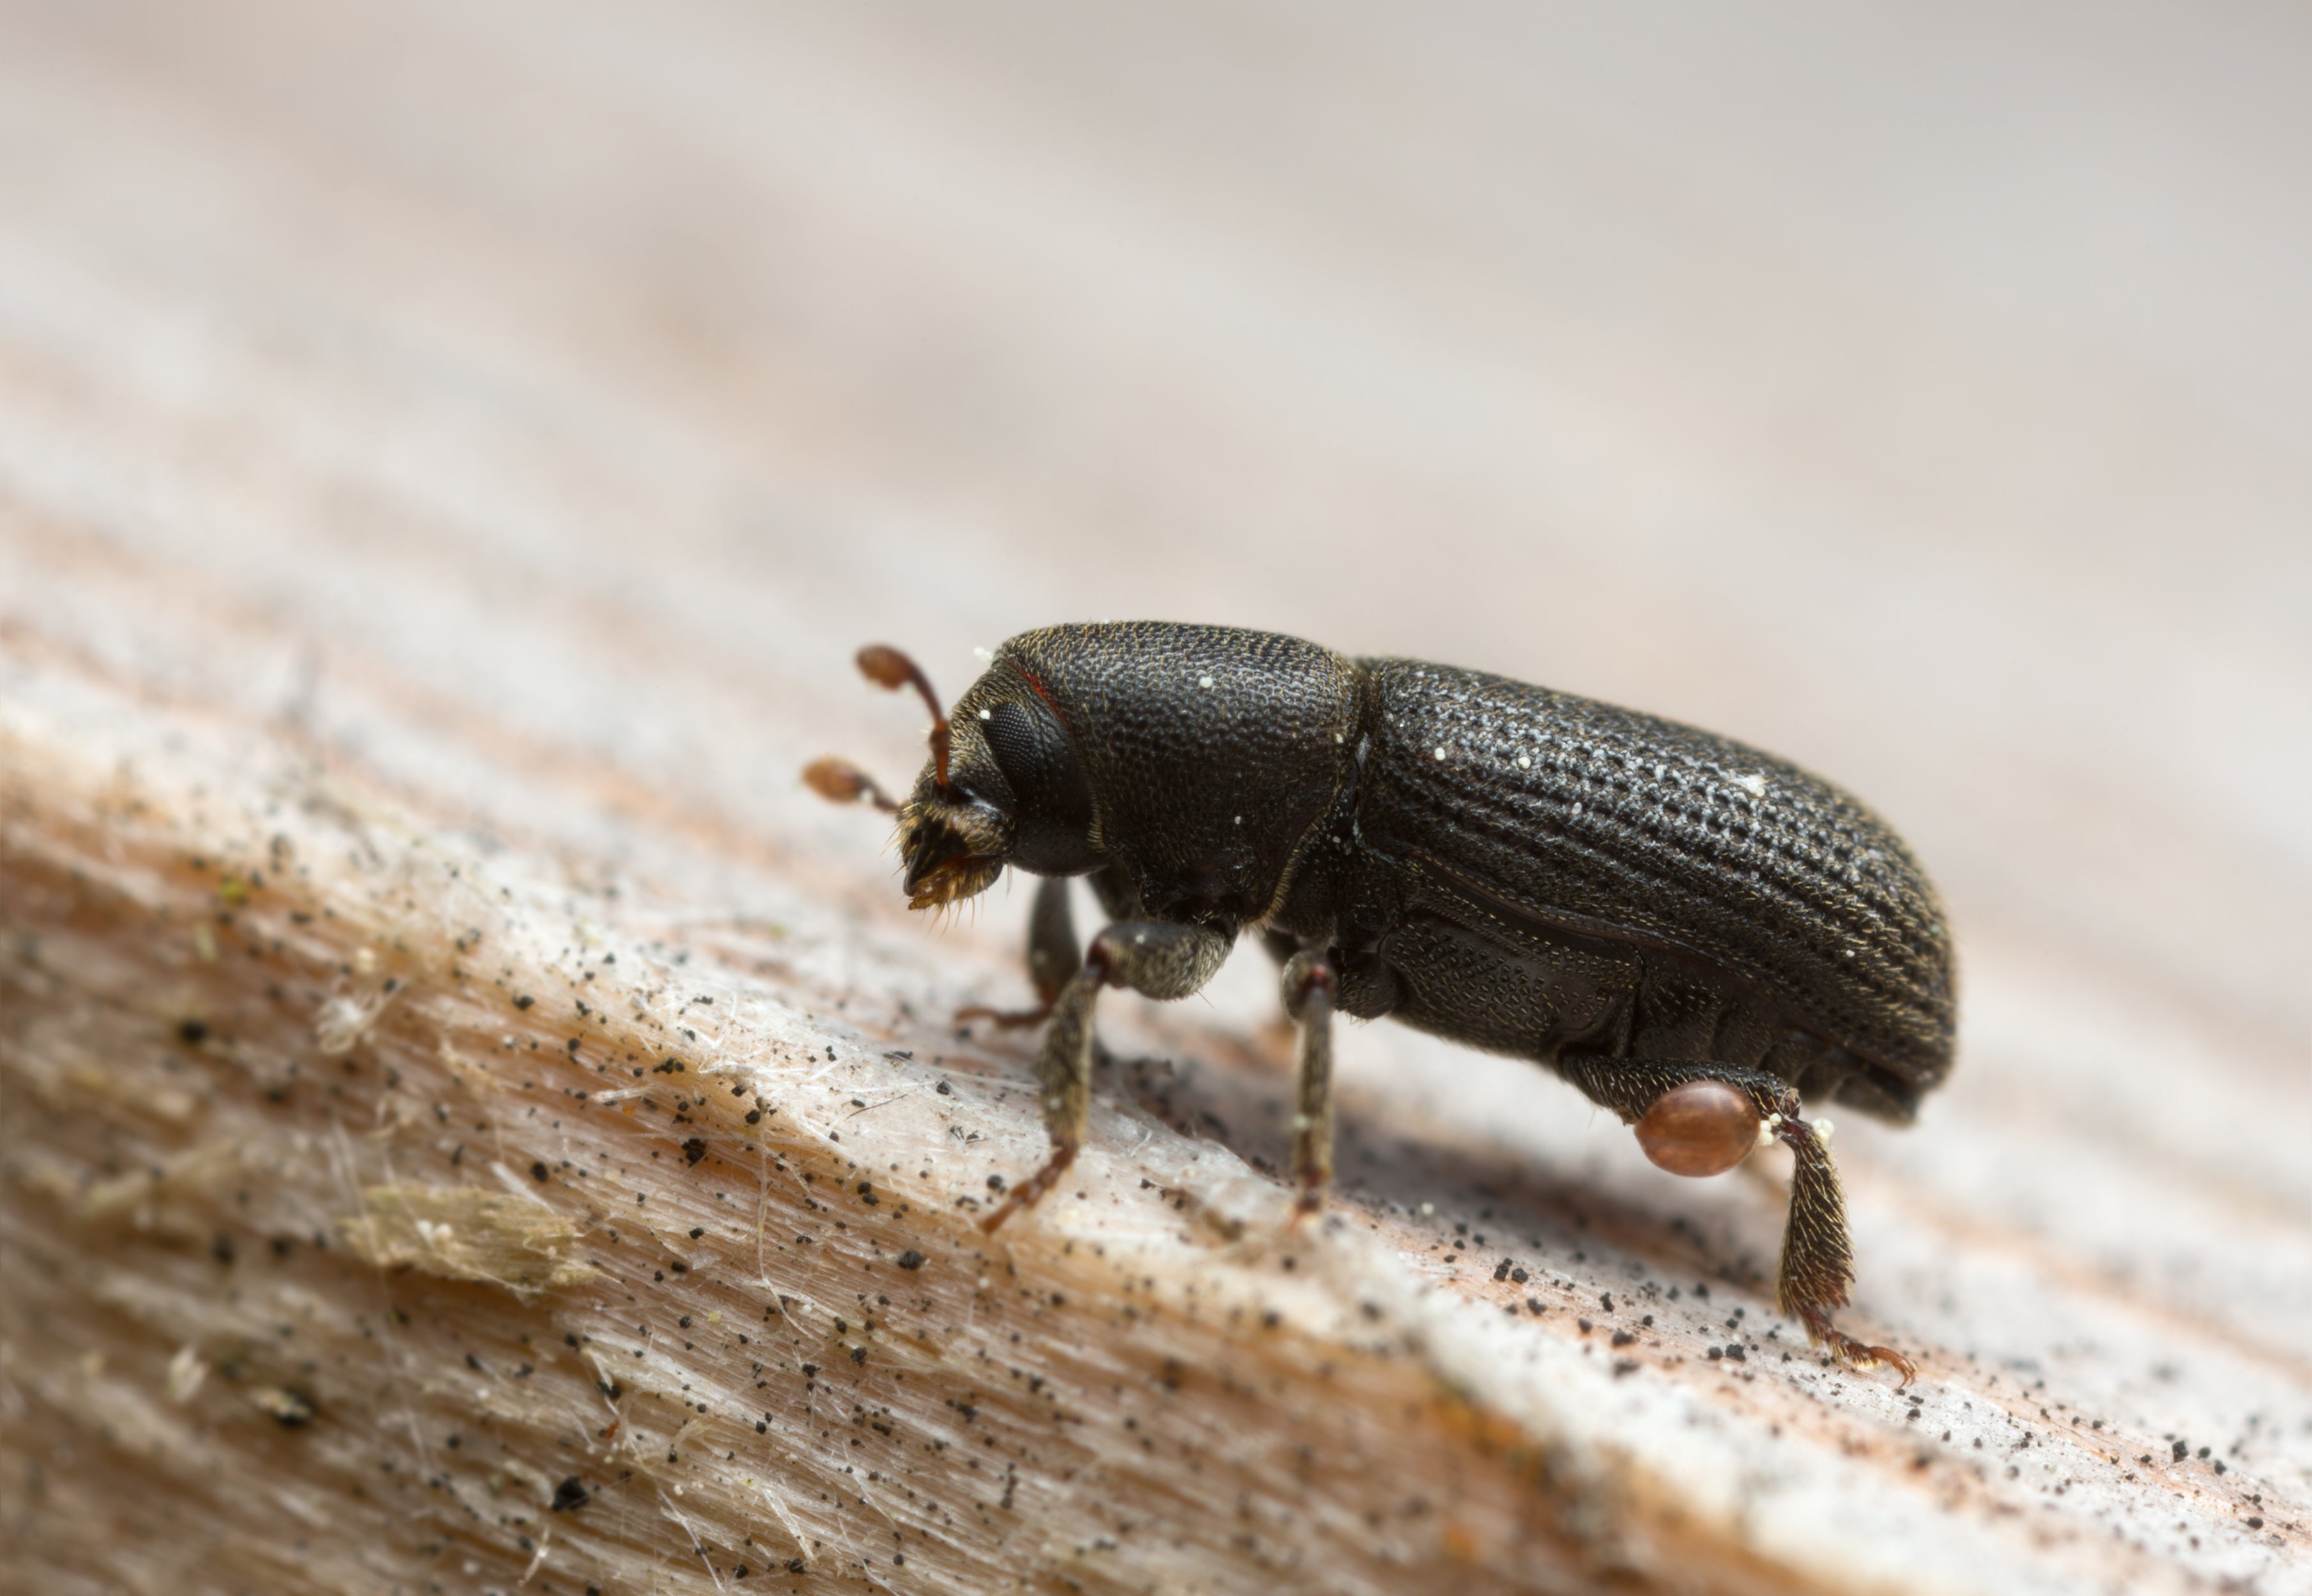 Bark beetles are a pest to forests